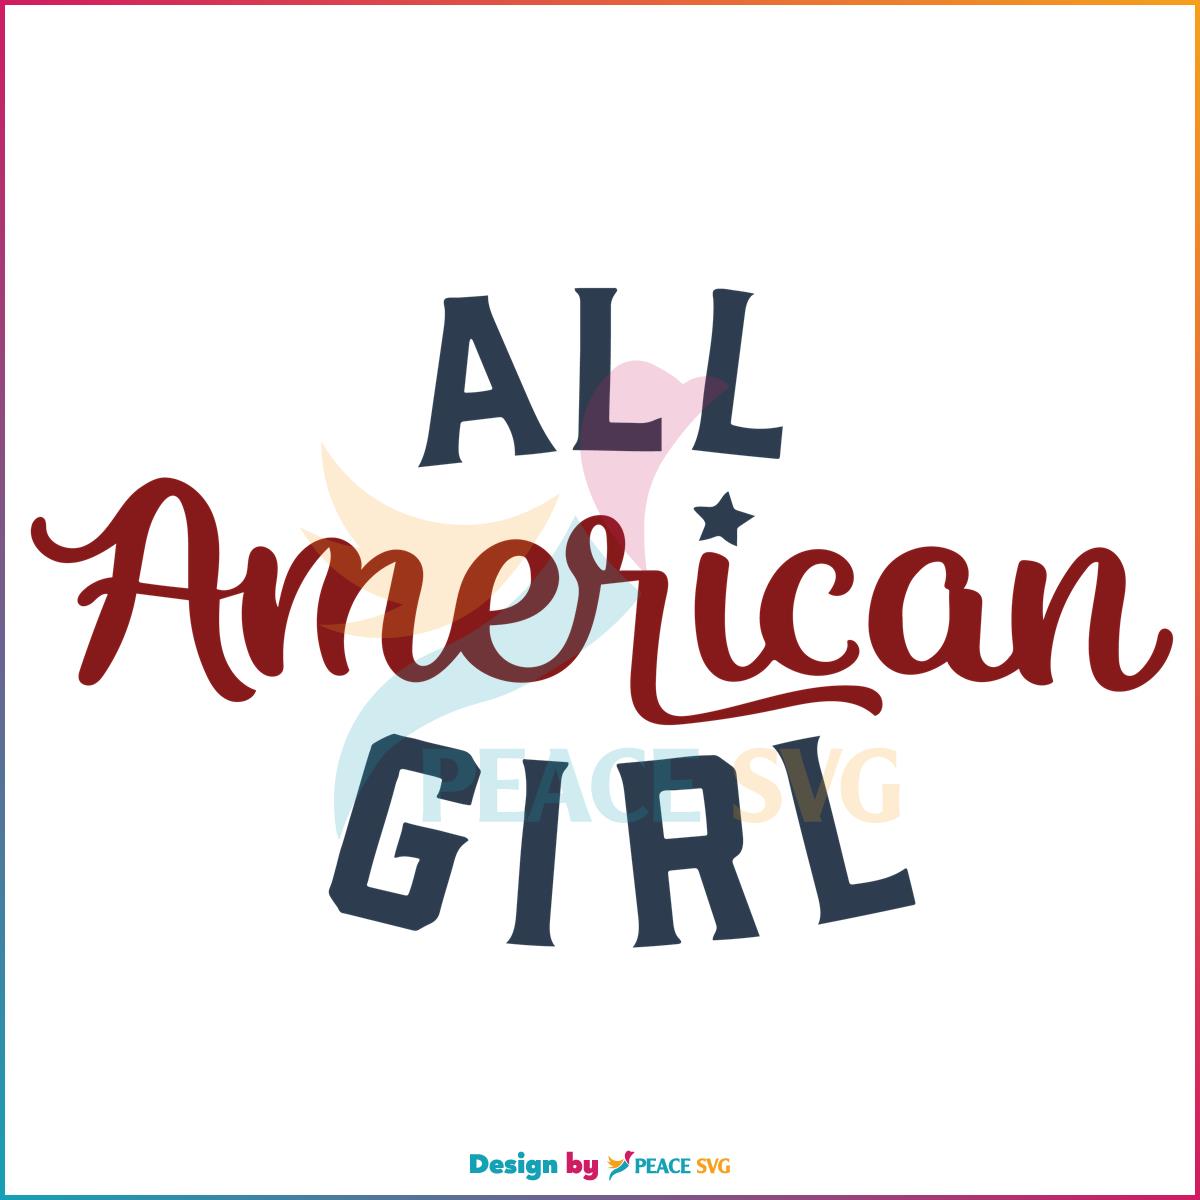 July 4th All American Girl Patriotic Day Funny SVG